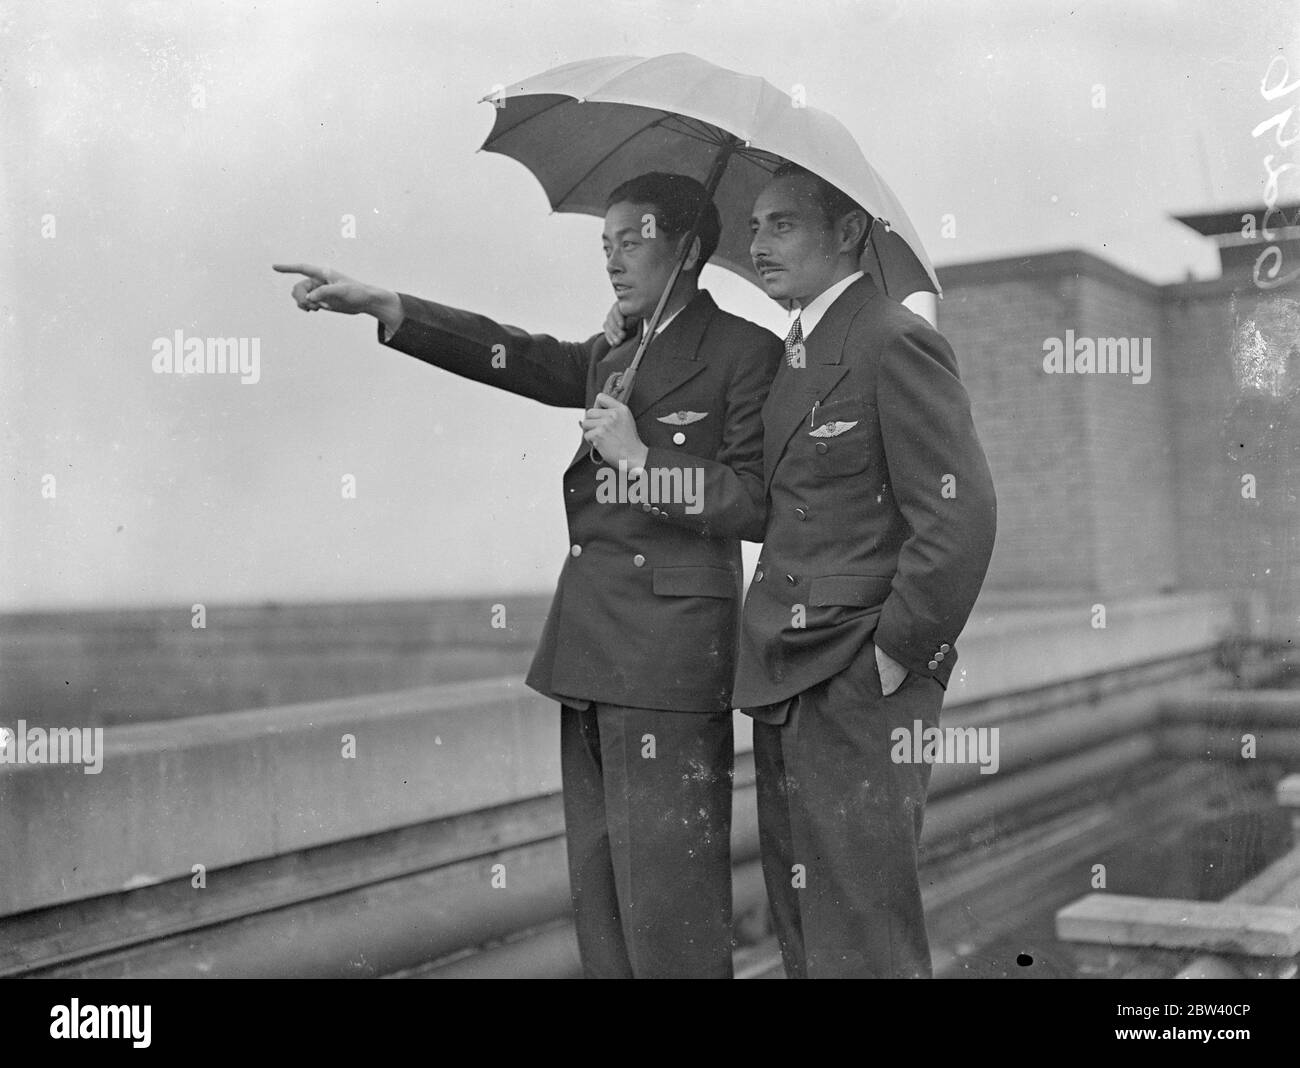 So this is London! Japanese airmen take a closer look in the rain. After smashing all records by flying the 10,000 miles from Tokyo to London in well under 100 hours, the Japanese airmen Masaaki Iinuma and Kenji Tsukakoshi, landed Croydon in their plane Divine Wind [Mitsubishi Ki-15 Karigane aircraft, name: Kamikaze, registration J-BAAI]. The flyers have brought Coronation greetings from Japan. Photo shows: sheltering under an umbrella the Japanese airmen Masaaki Iinuma (left) the 27-year-old pilot, and his radio operator Kenji Tsukakoshi get closer look at London from the roof of their hotel. Stock Photo